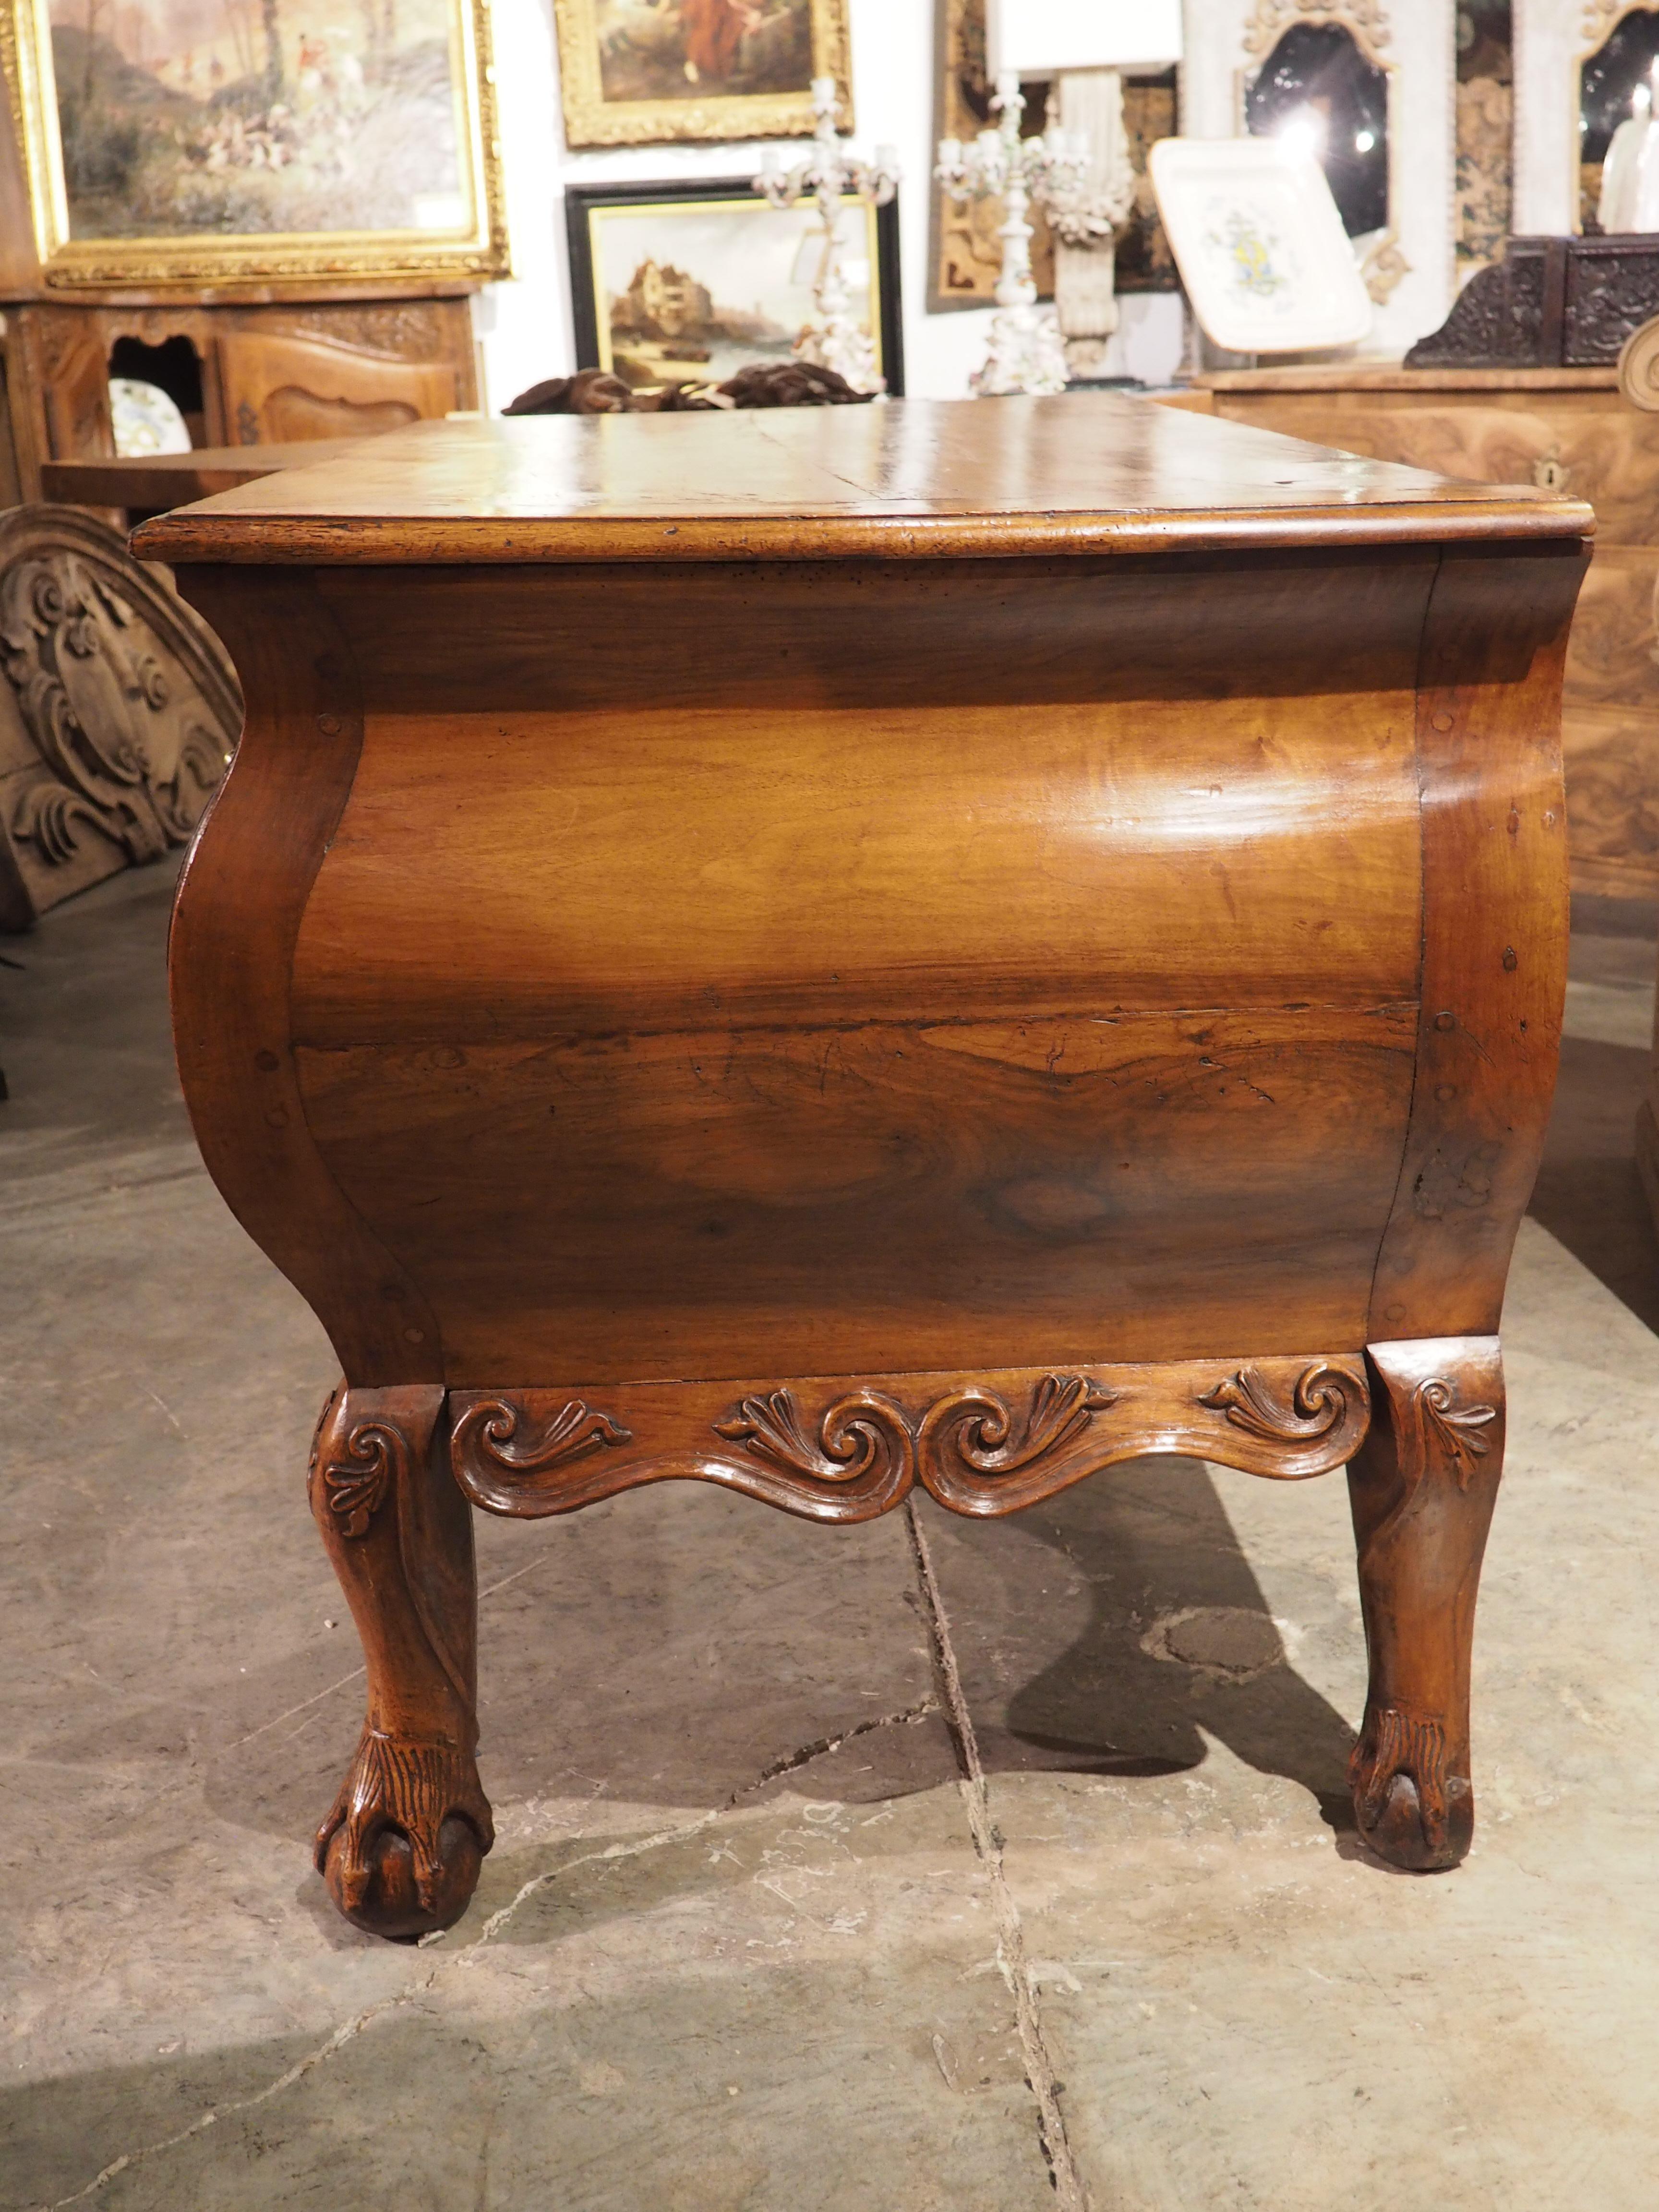 Rare 18th Century French Walnut Commode “Angouleme” with Stamped Bronze Hardware For Sale 2